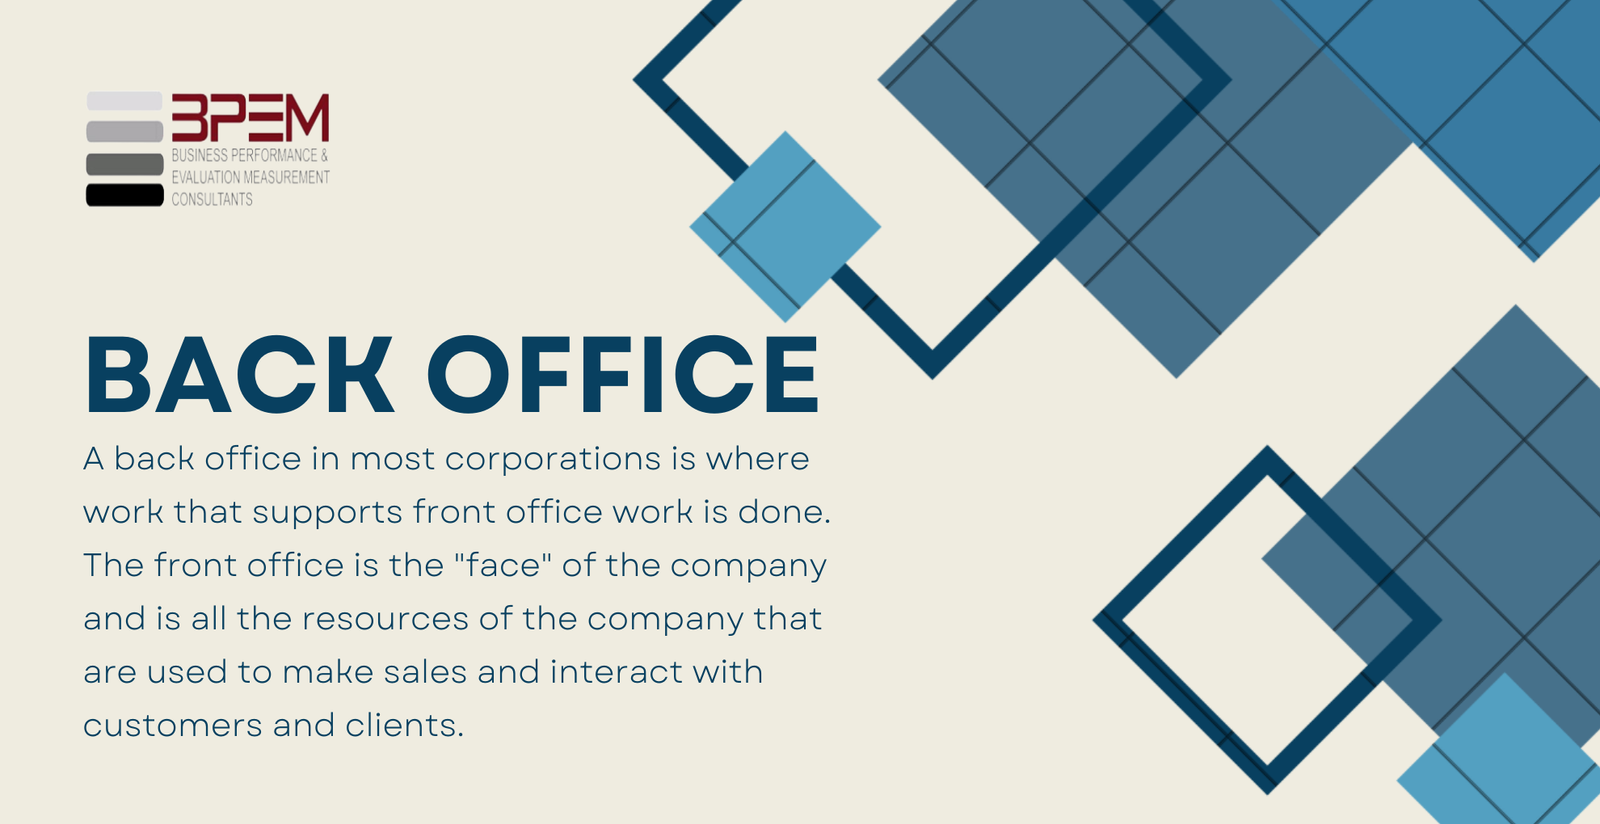 Back Office Definition